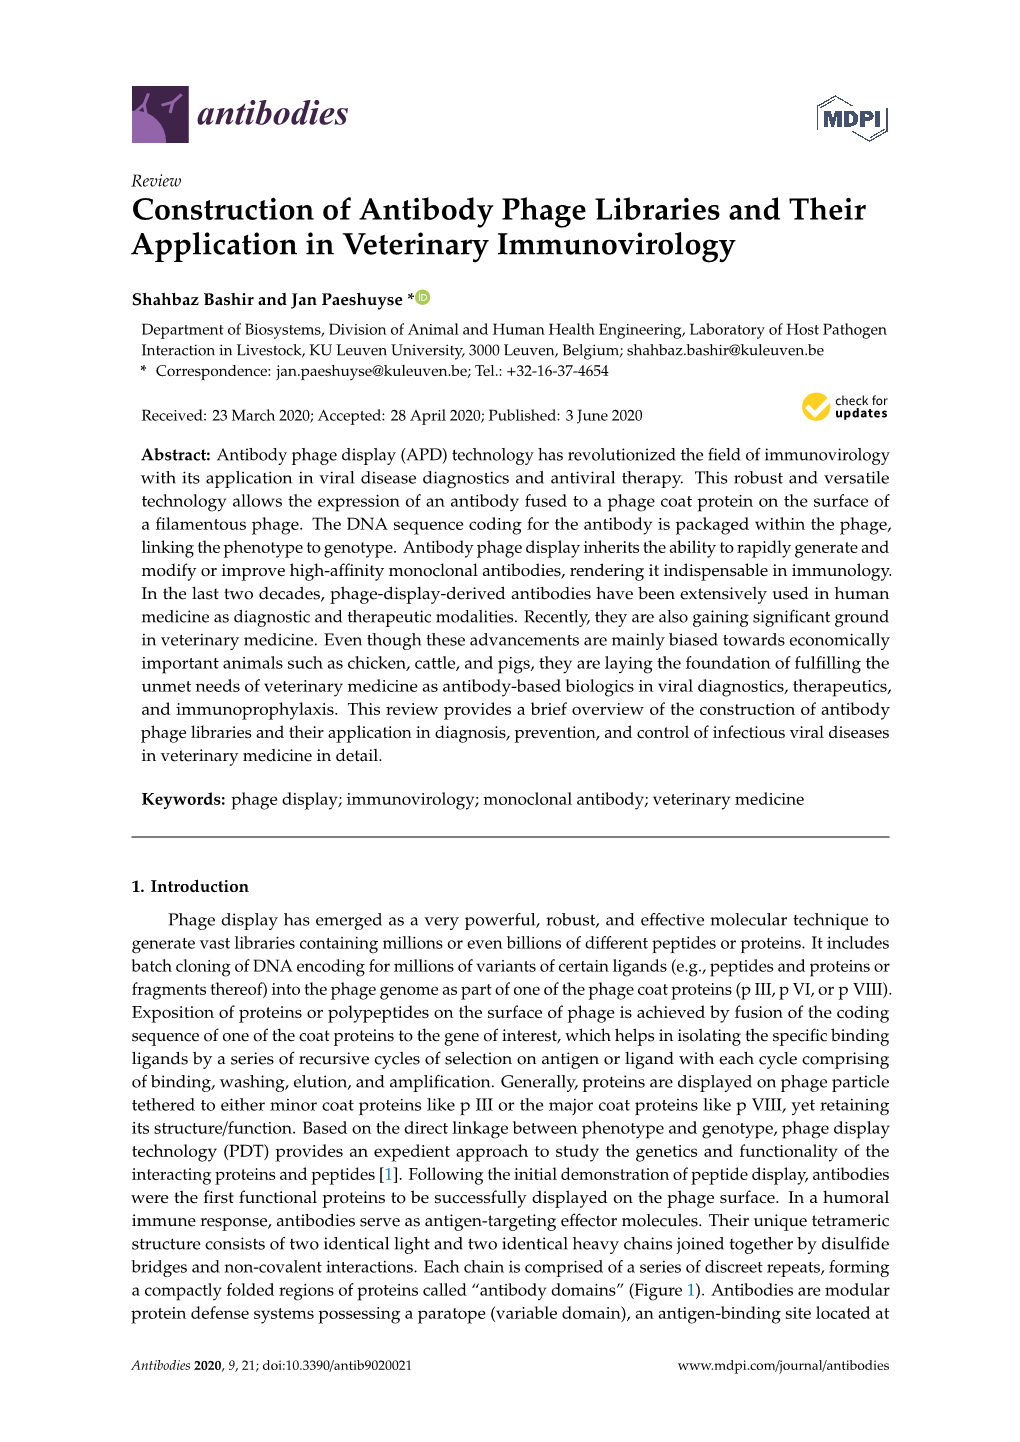 Construction of Antibody Phage Libraries and Their Application in Veterinary Immunovirology